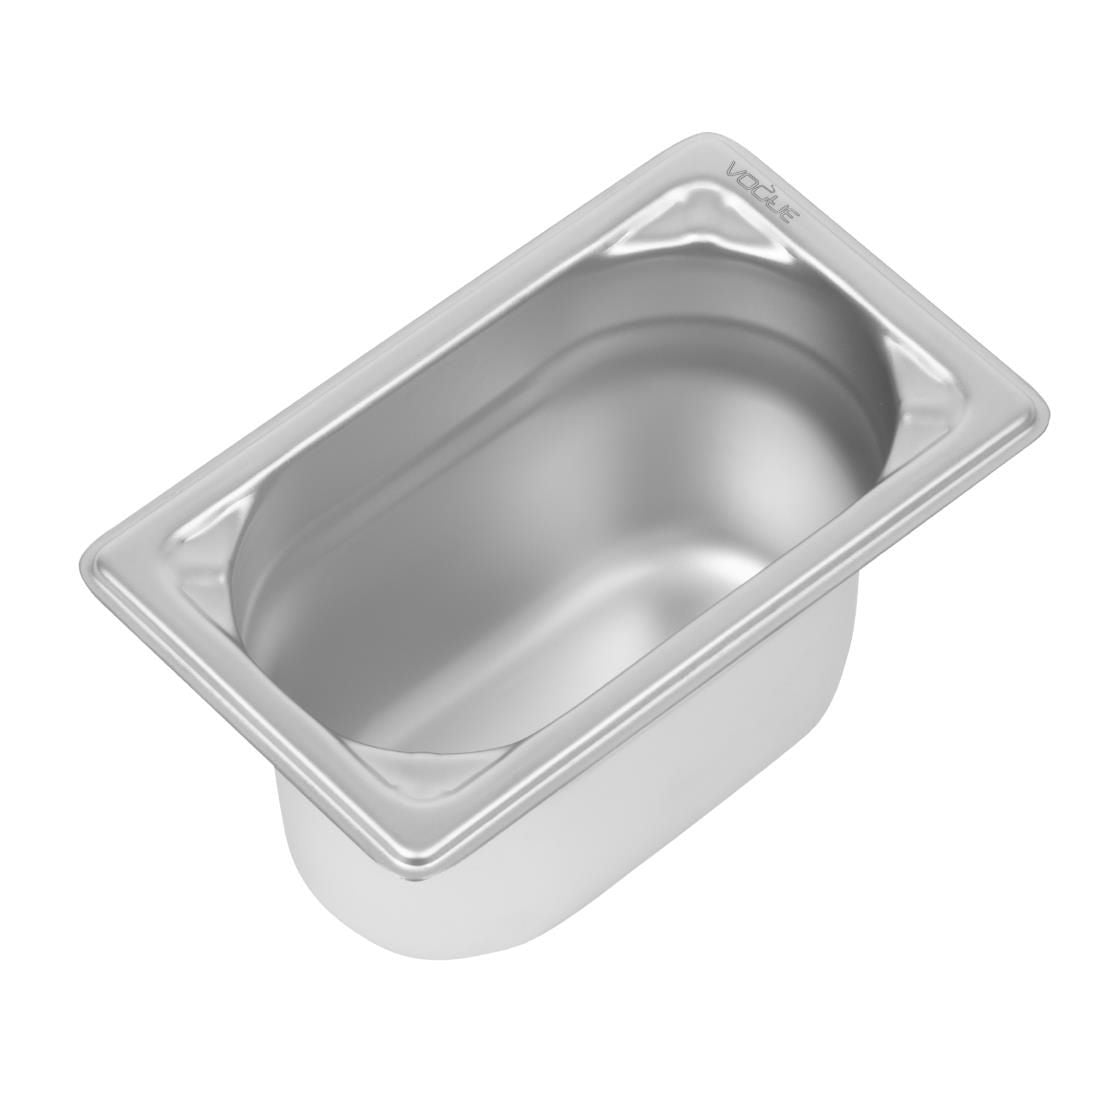 Vogue Heavy Duty Stainless Steel 1/9 Gastronorm Pan 100mm